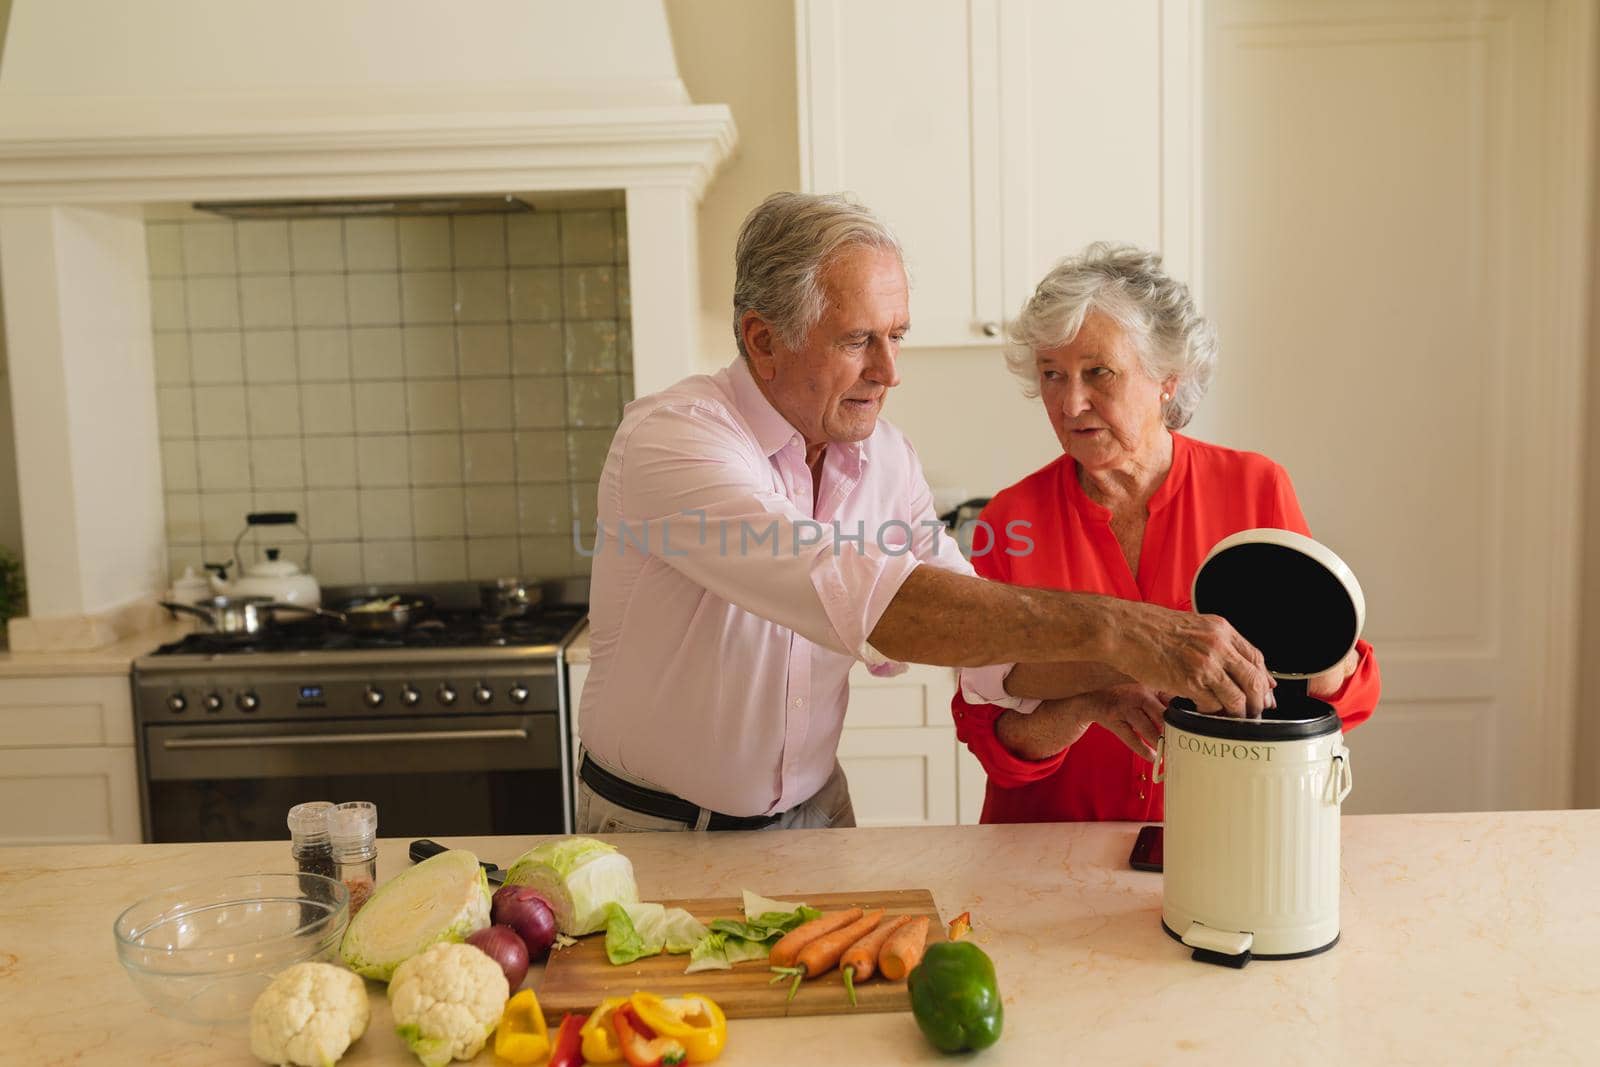 Senior caucasian couple cooking together and talking in kitchen. retreat, retirement and happy senior lifestyle concept.